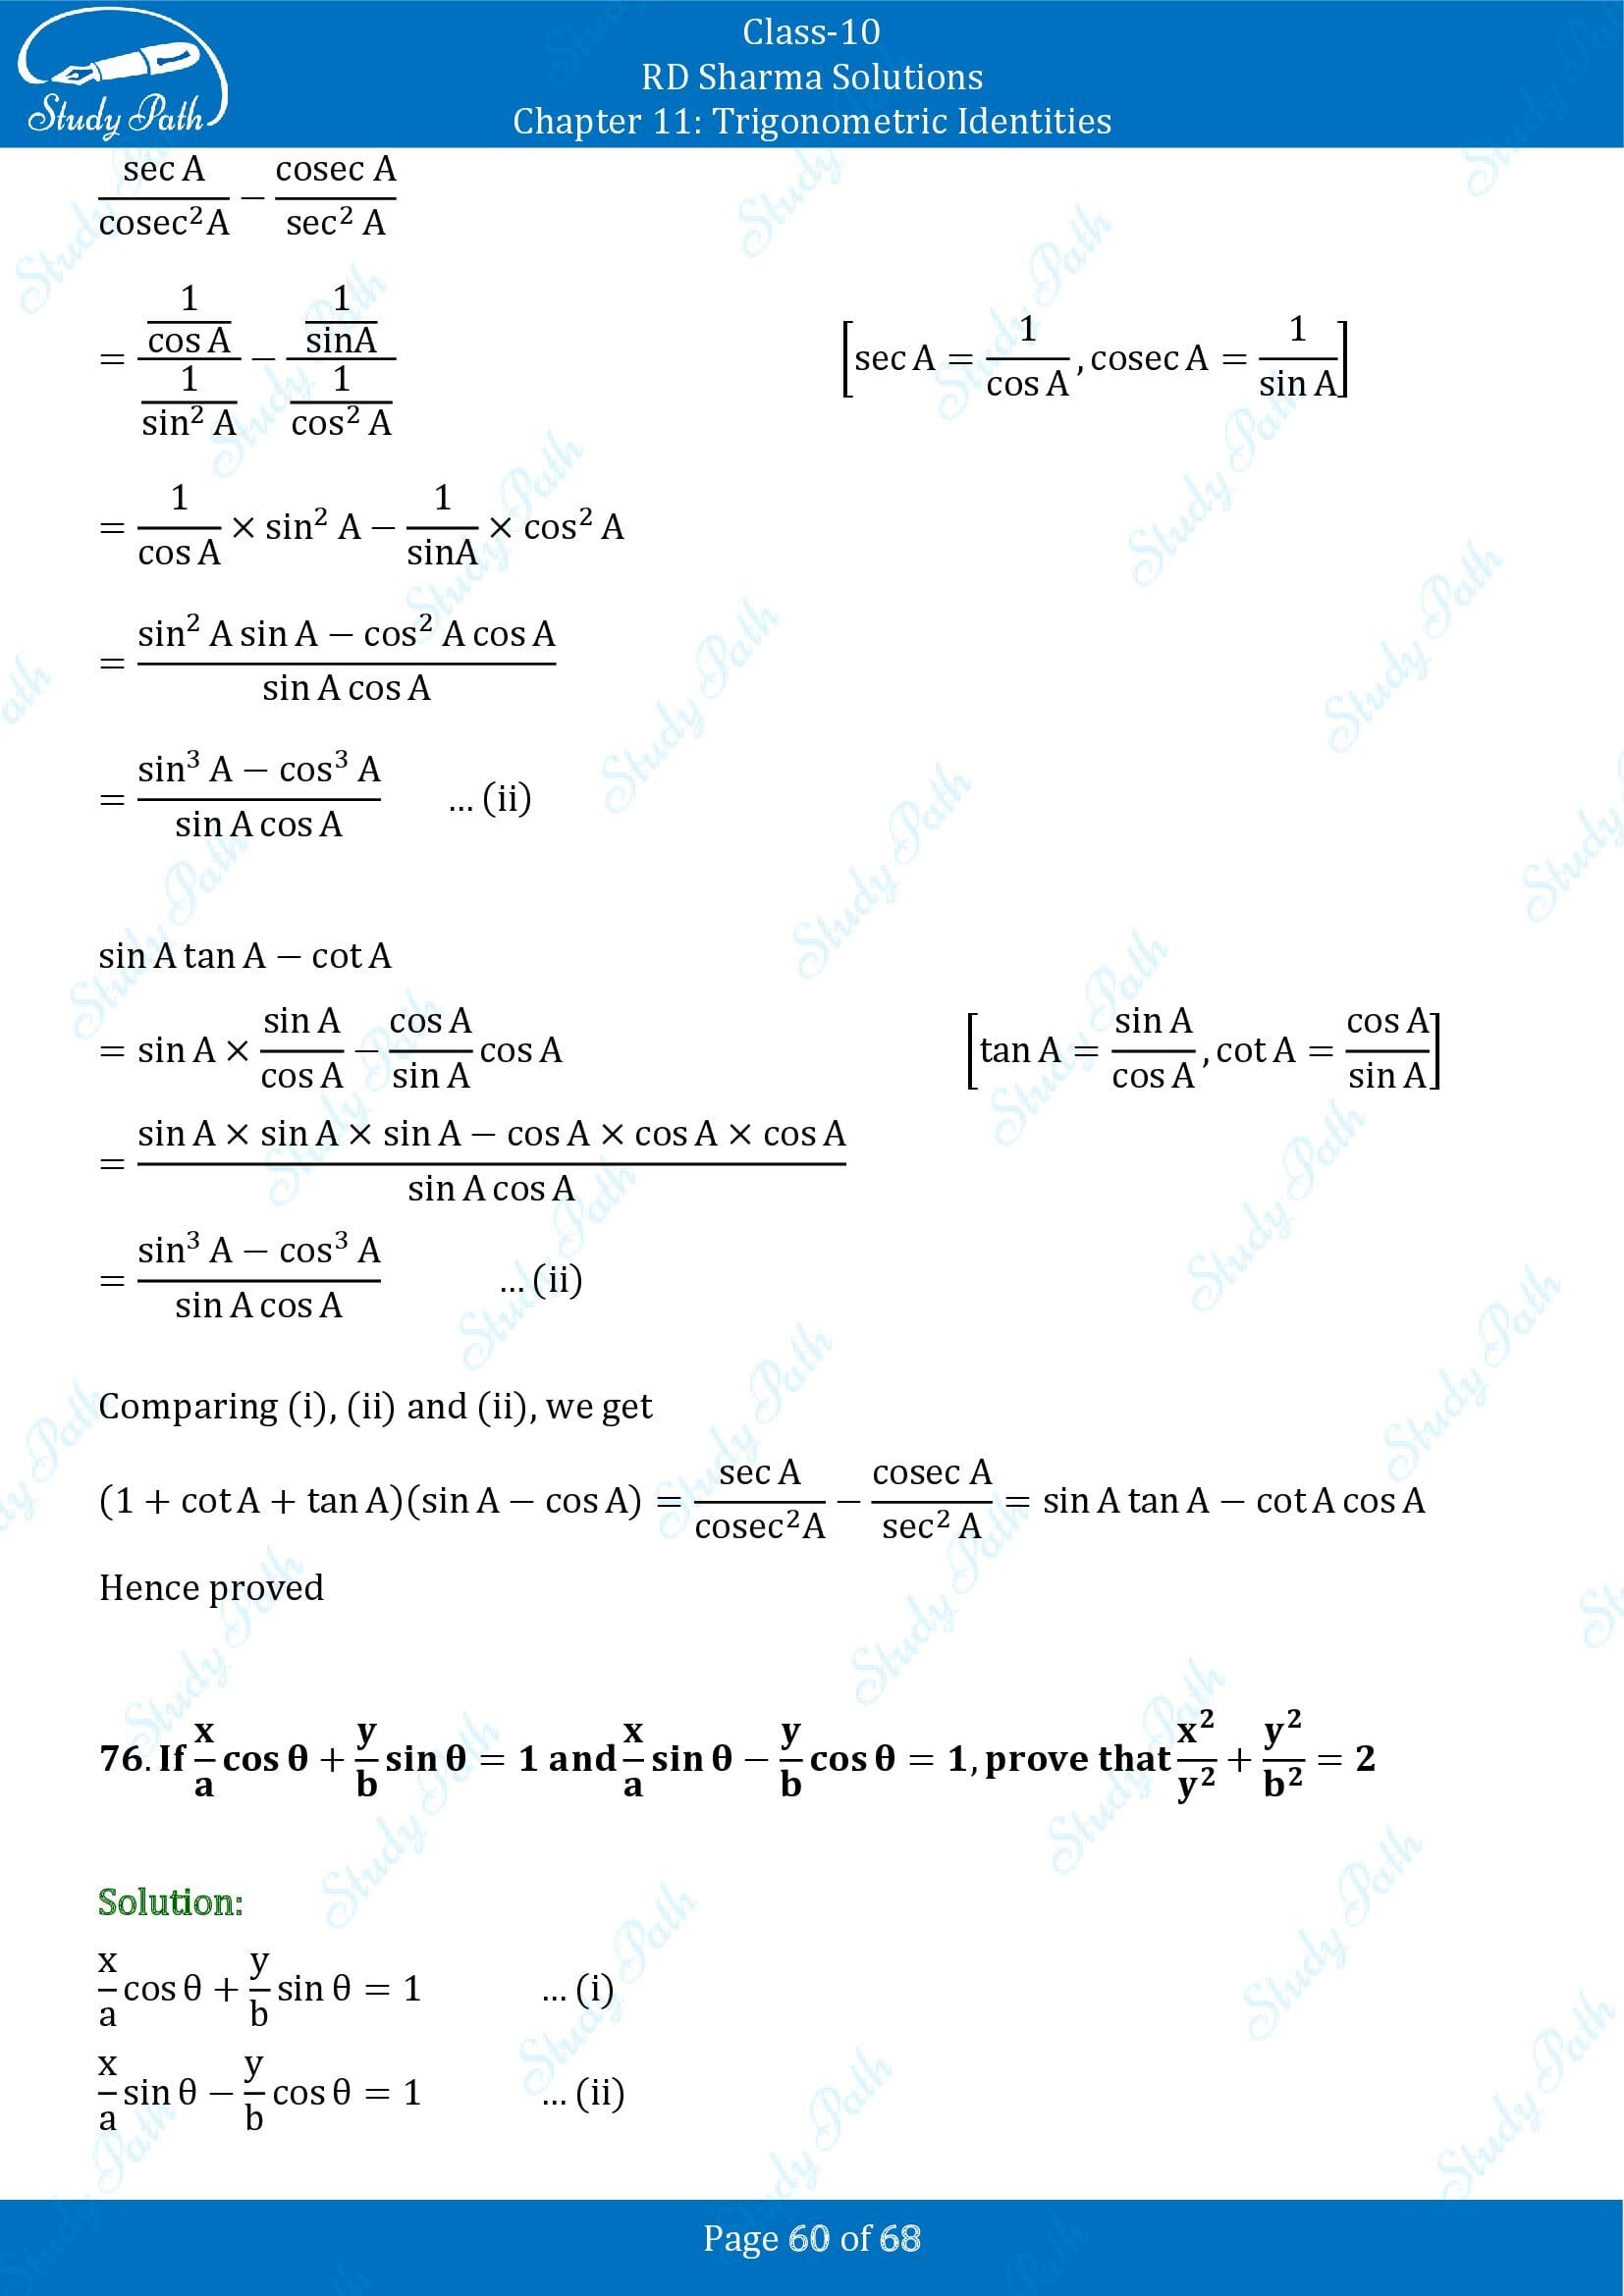 RD Sharma Solutions Class 10 Chapter 11 Trigonometric Identities Exercise 11.1 00060